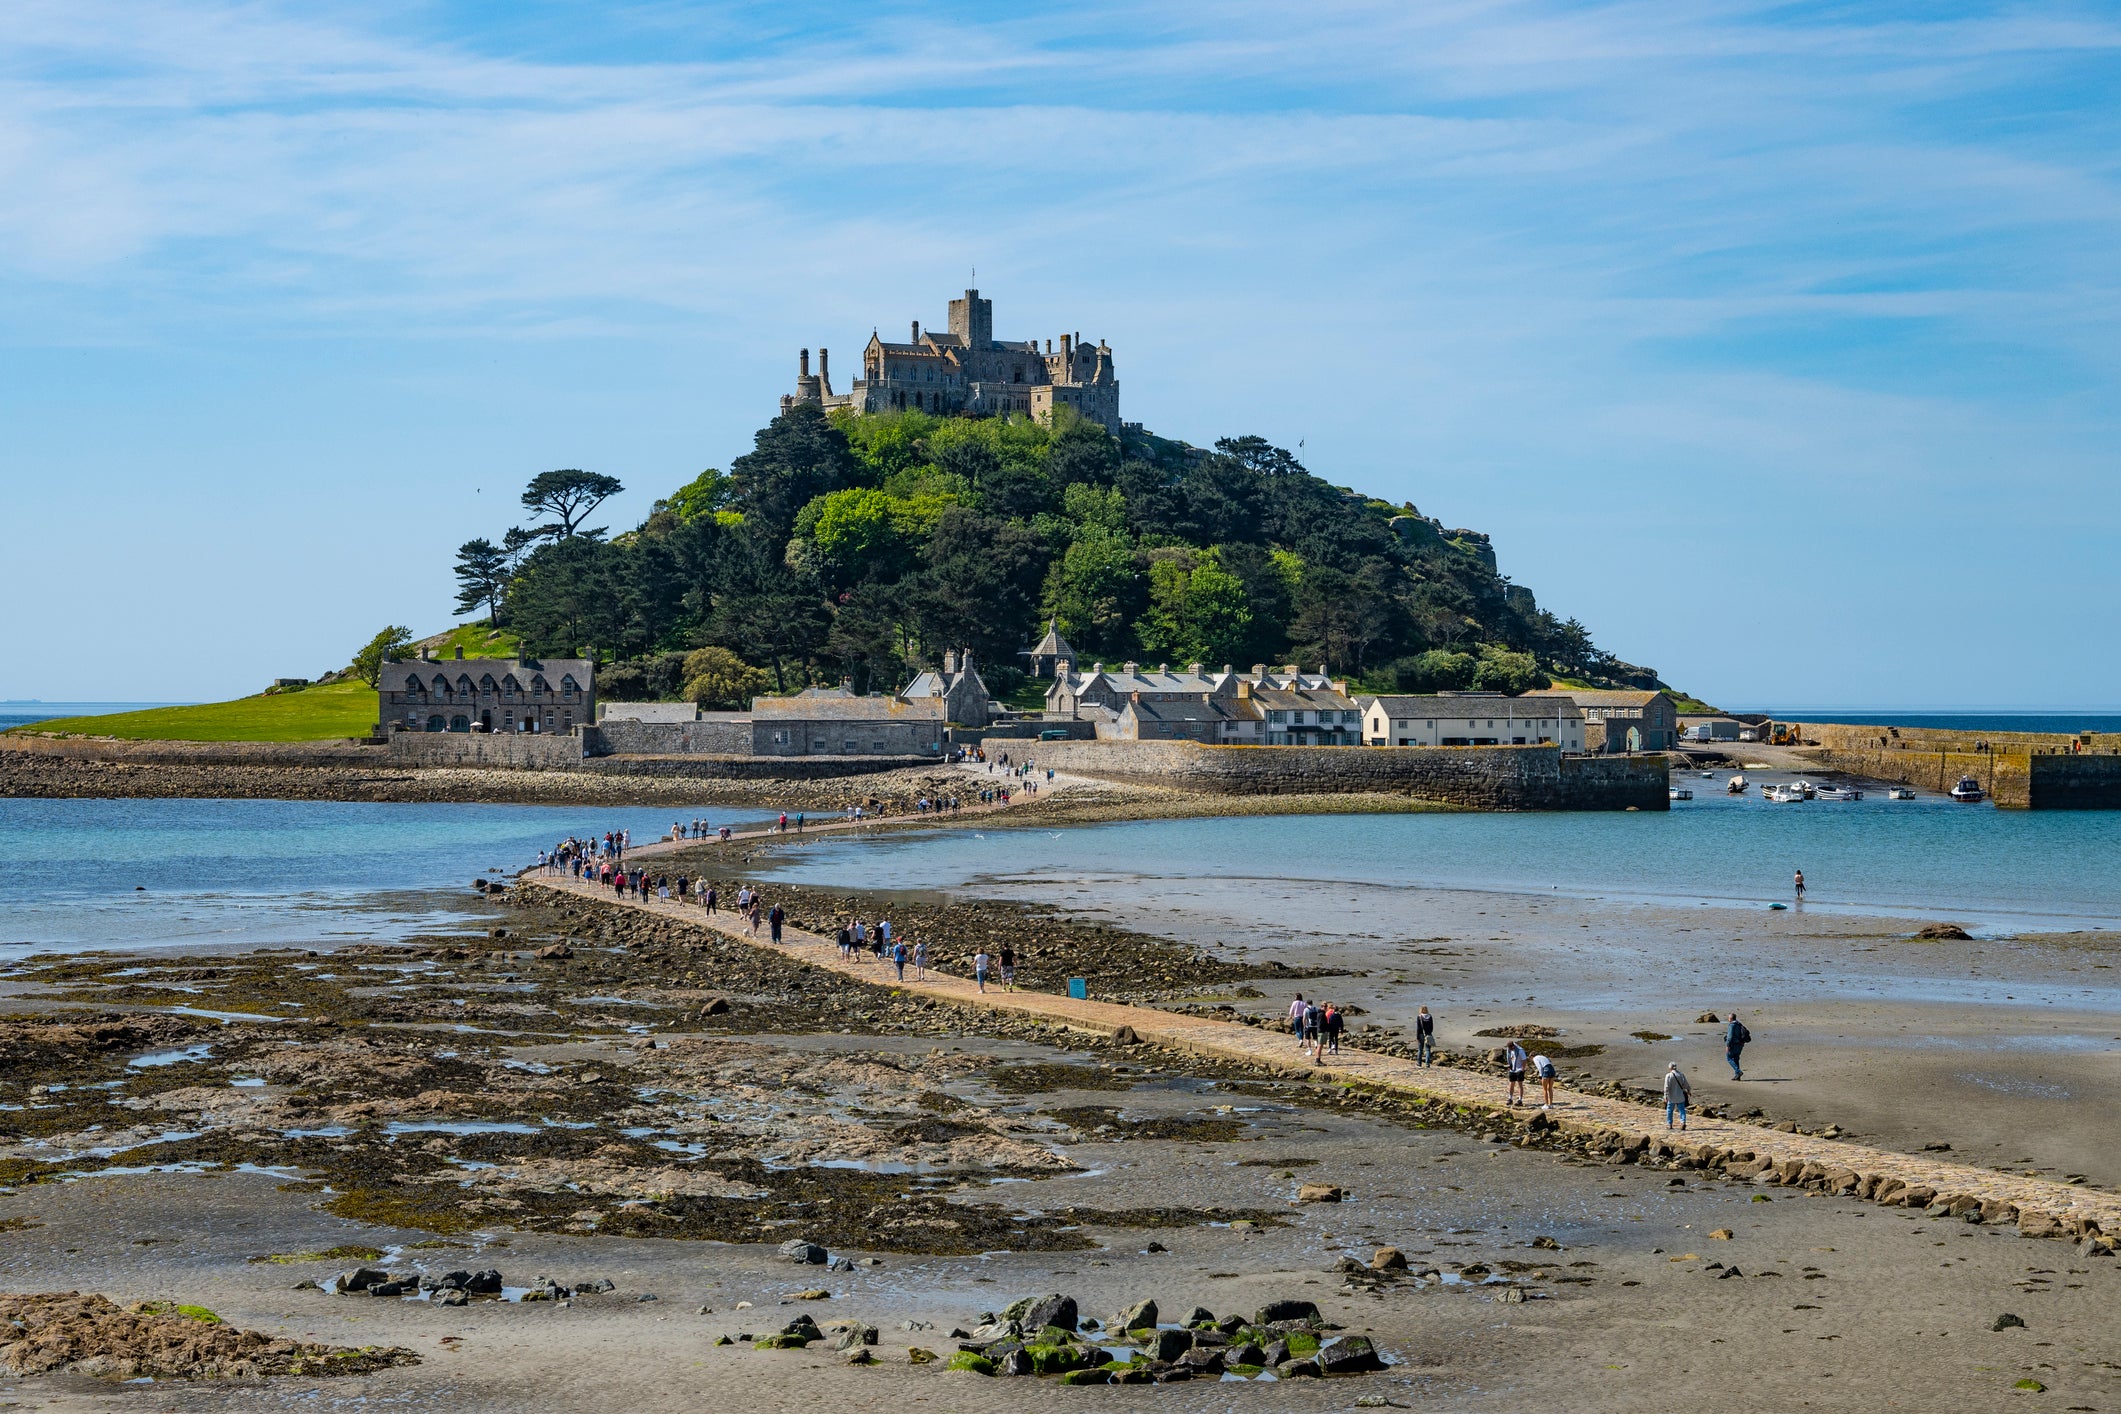 This ancient tidal island is linked to Marazion by a causeway